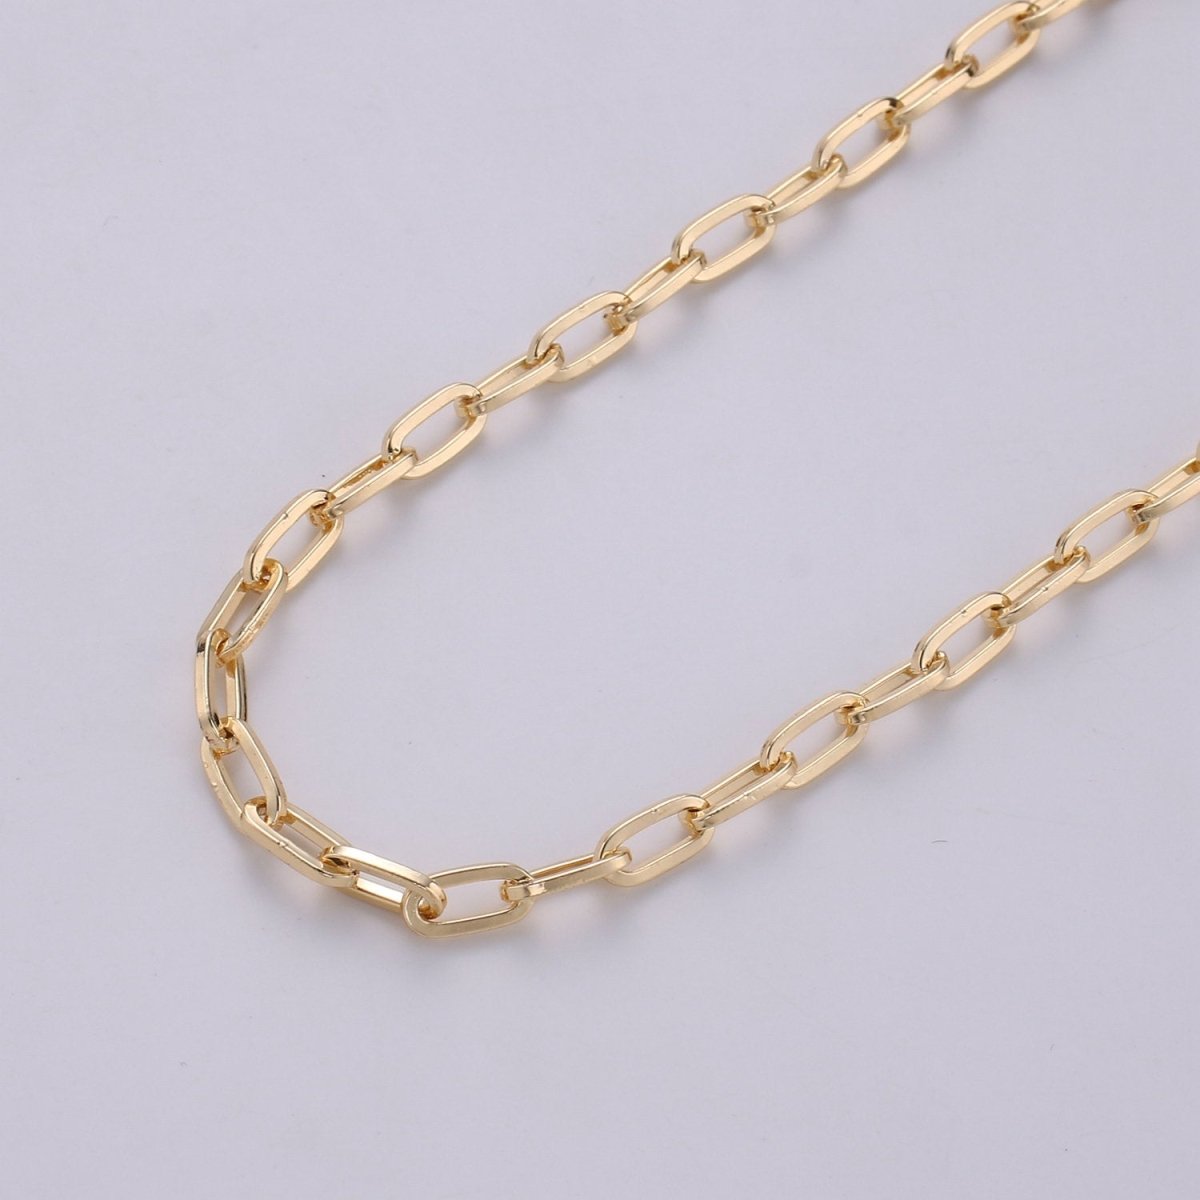 Oval Paperclip Chain Necklace 18k Gold Plated Long Oval Paper Clip Chain 1 yard, 3 feet Lead, Nickel Free Unfinished Link Chain | ROLL-251 Clearance Pricing - DLUXCA